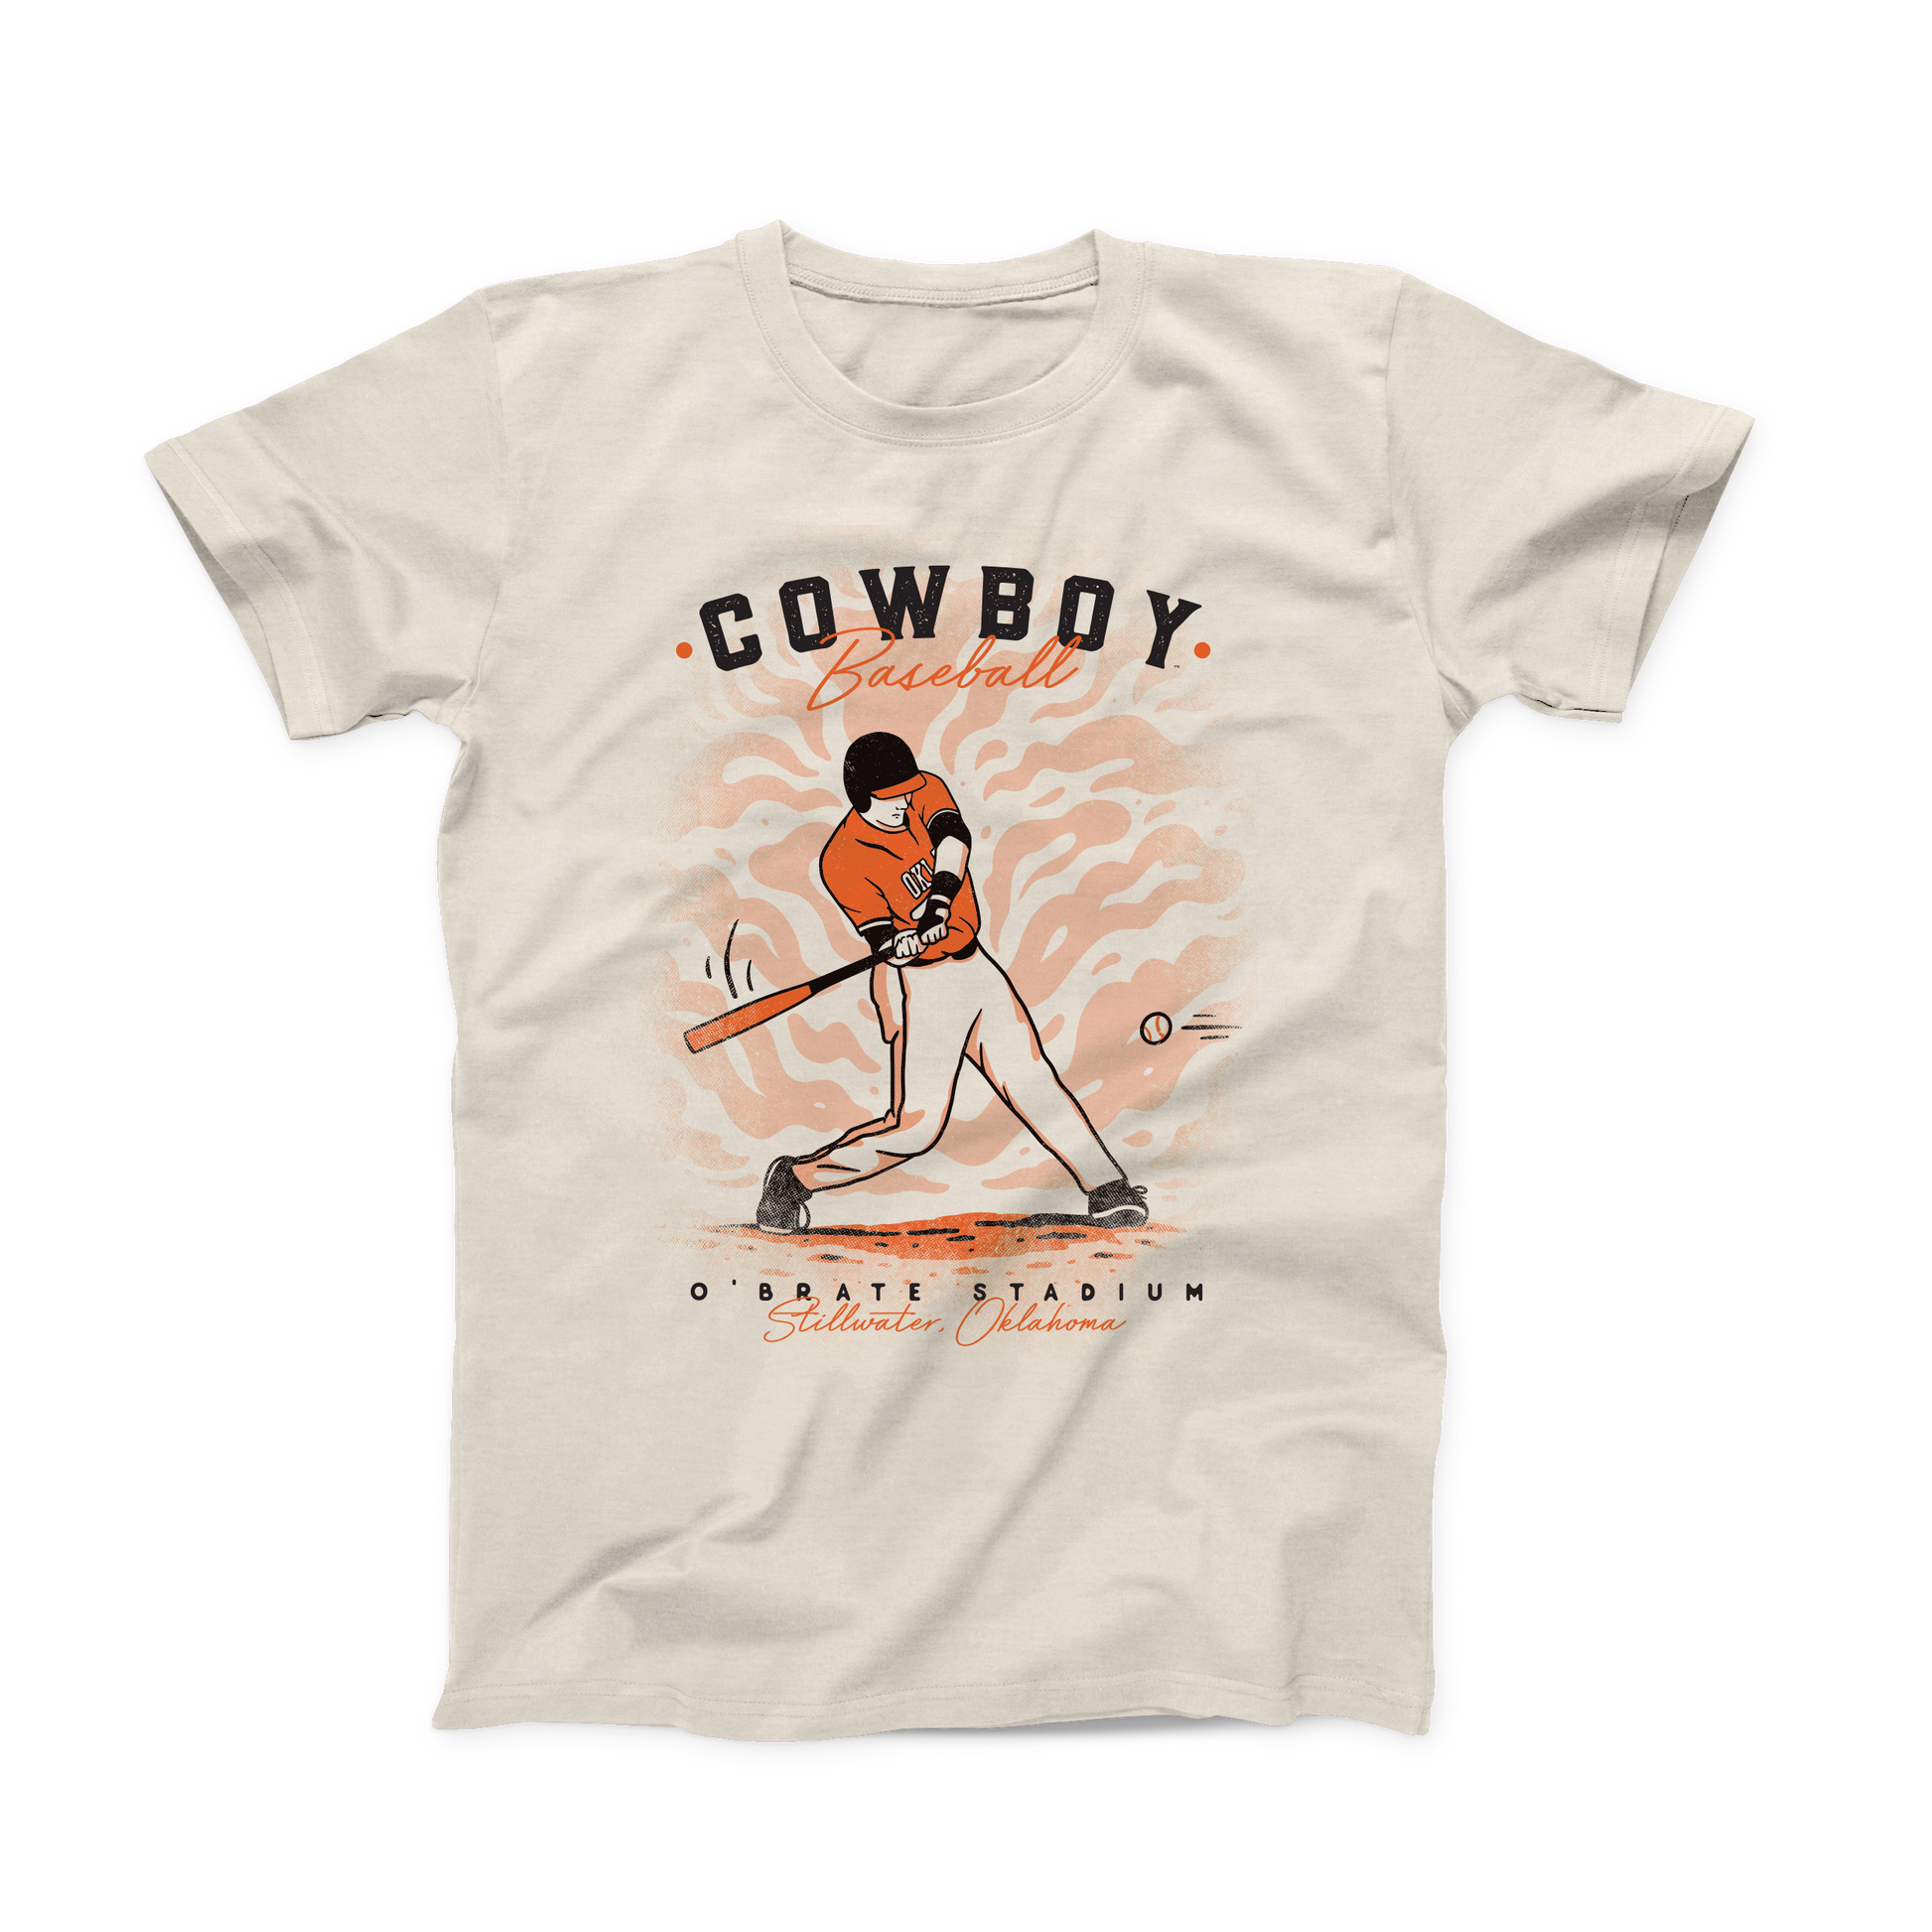 Natural colored OSU T-shirt. "Cowboy Baseball" across the top. OSU Baseball player mid strike in the middle of the shirt. "O'Brate Stadium, Stillwater Oklahoma" Across the bottom. "Baseball" & location printed in an orange script font. "Cowboy" & "O'brate Stadium" in a sans serif black font.  